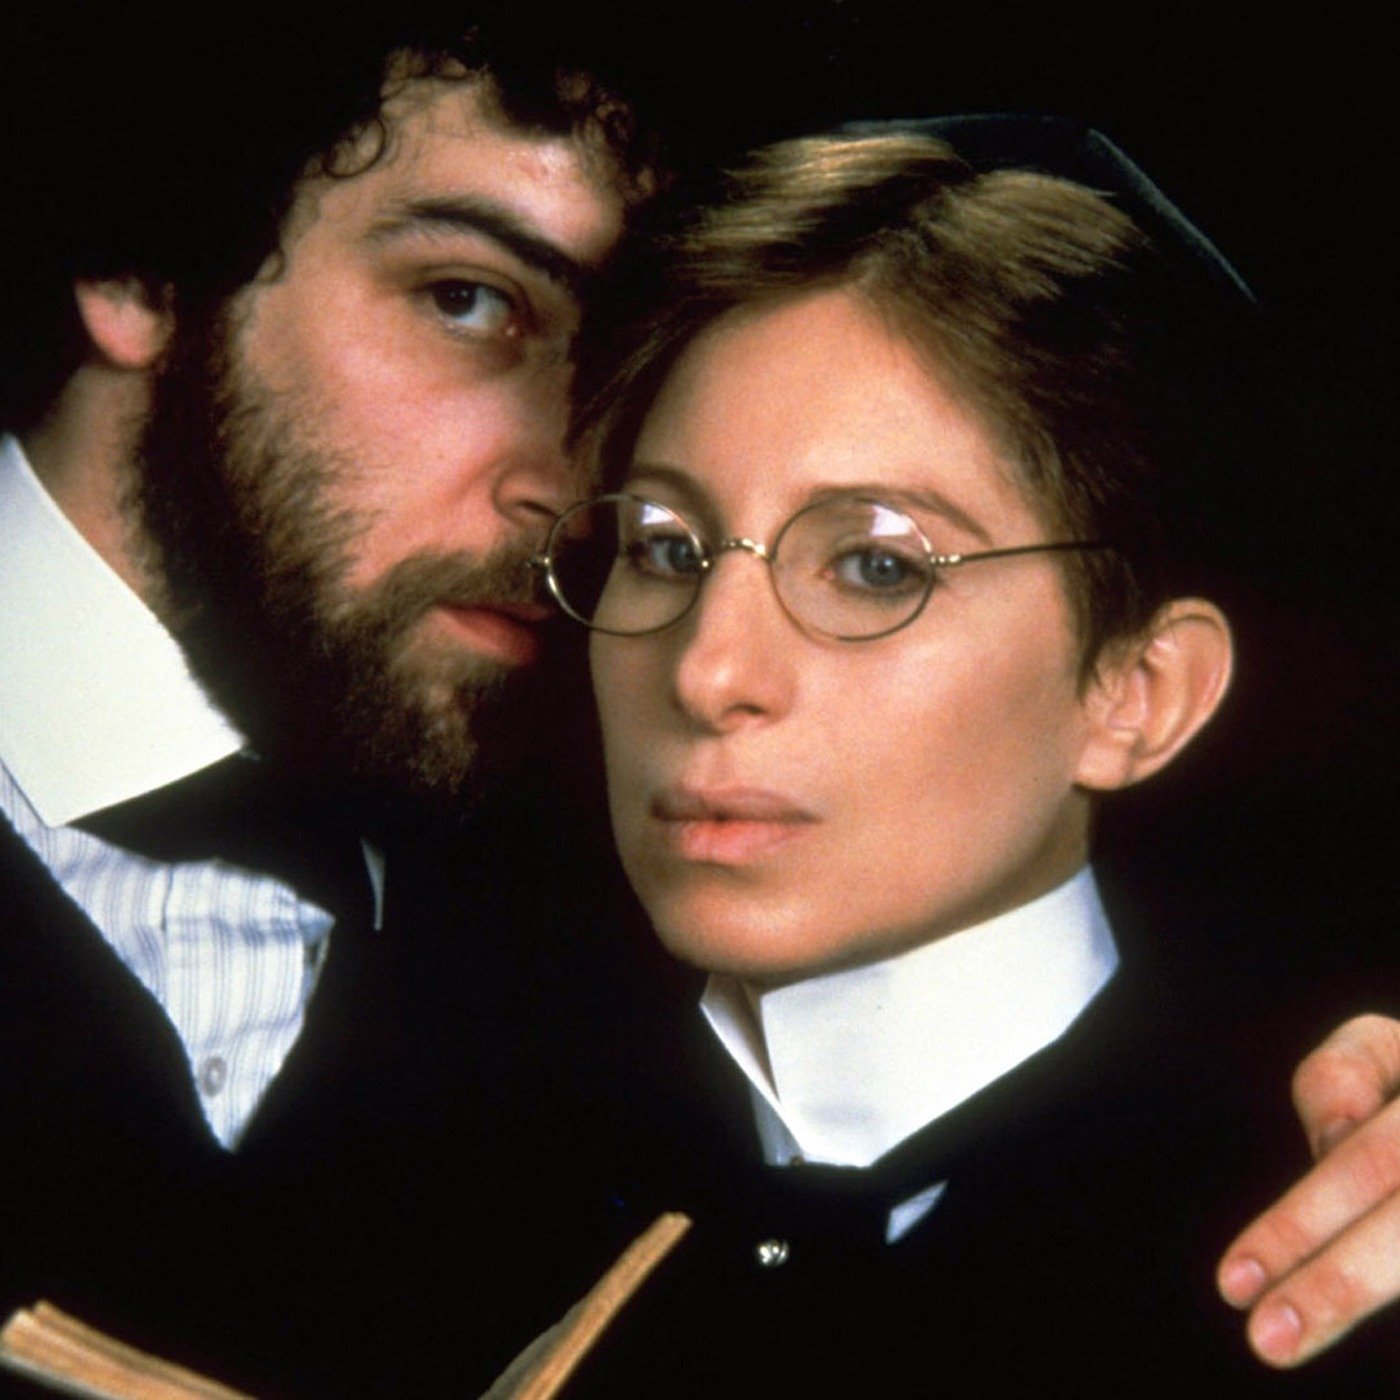 The Best Movies About Judaism and Being Jewish